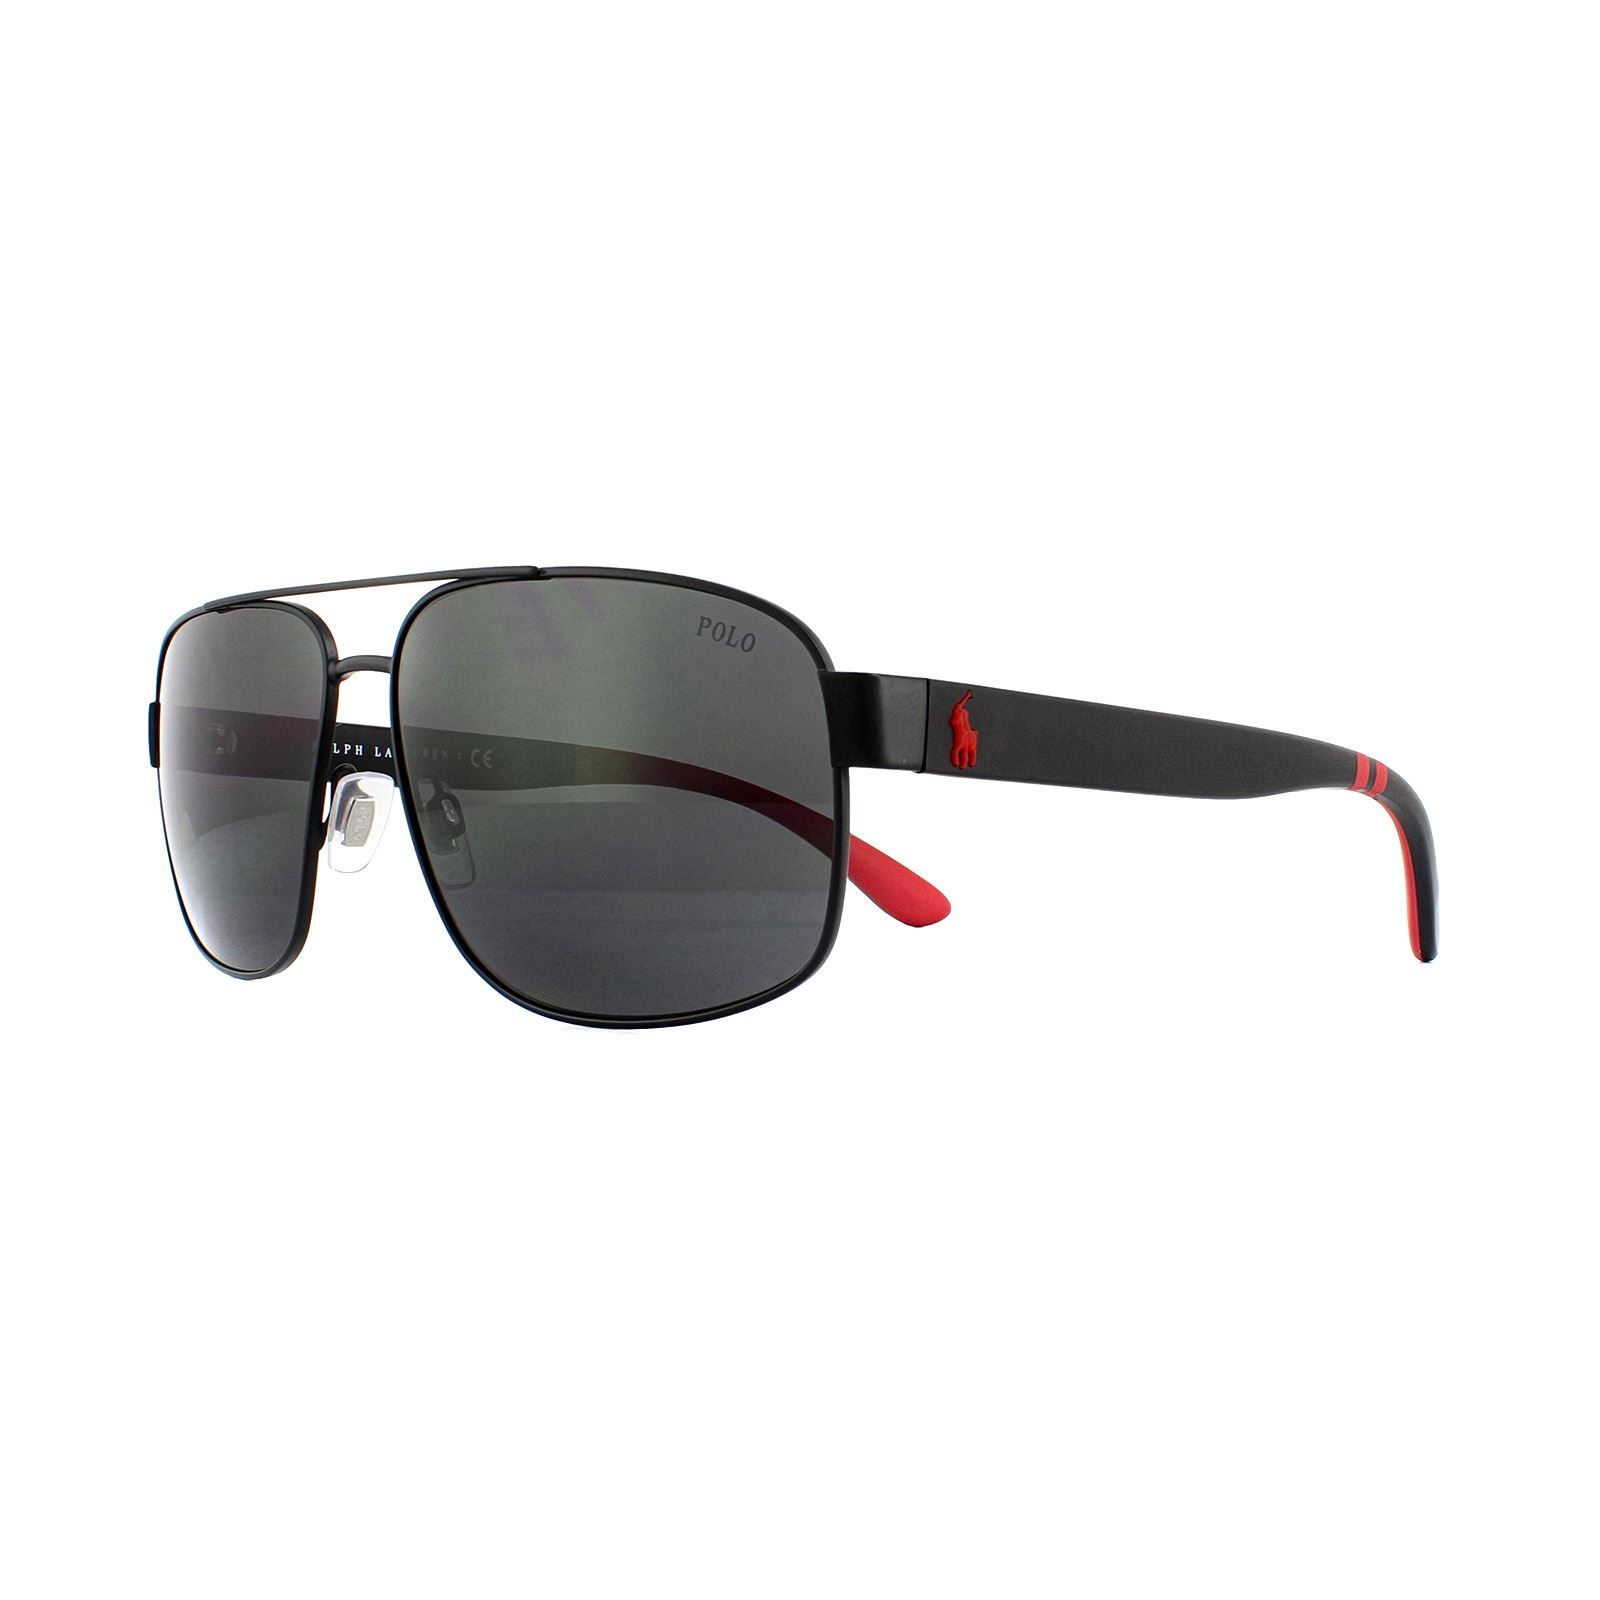 Polo Ralph Lauren Sunglasses 3112 903887 Matte Black Grey are a rectangular style aviator for men. The frame front is metal with plastic temples that adorn the iconic Polo Ralph Lauren logo in a contrasting colour and matching accents. Adjustable nose pads ensure a personalised and comfortable fit whilst looking stylish.